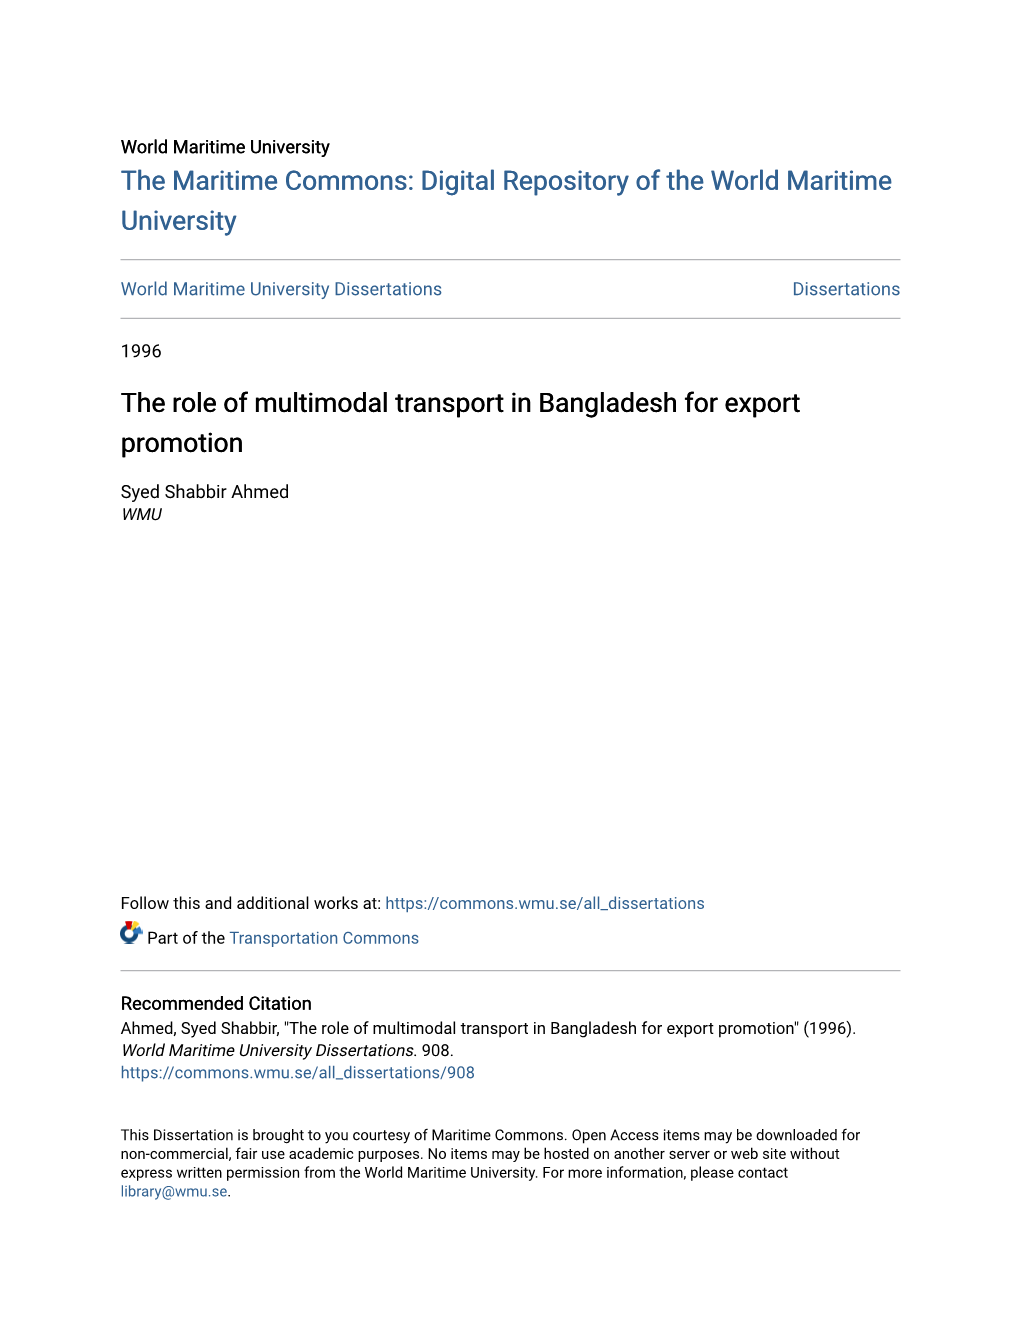 The Role of Multimodal Transport in Bangladesh for Export Promotion